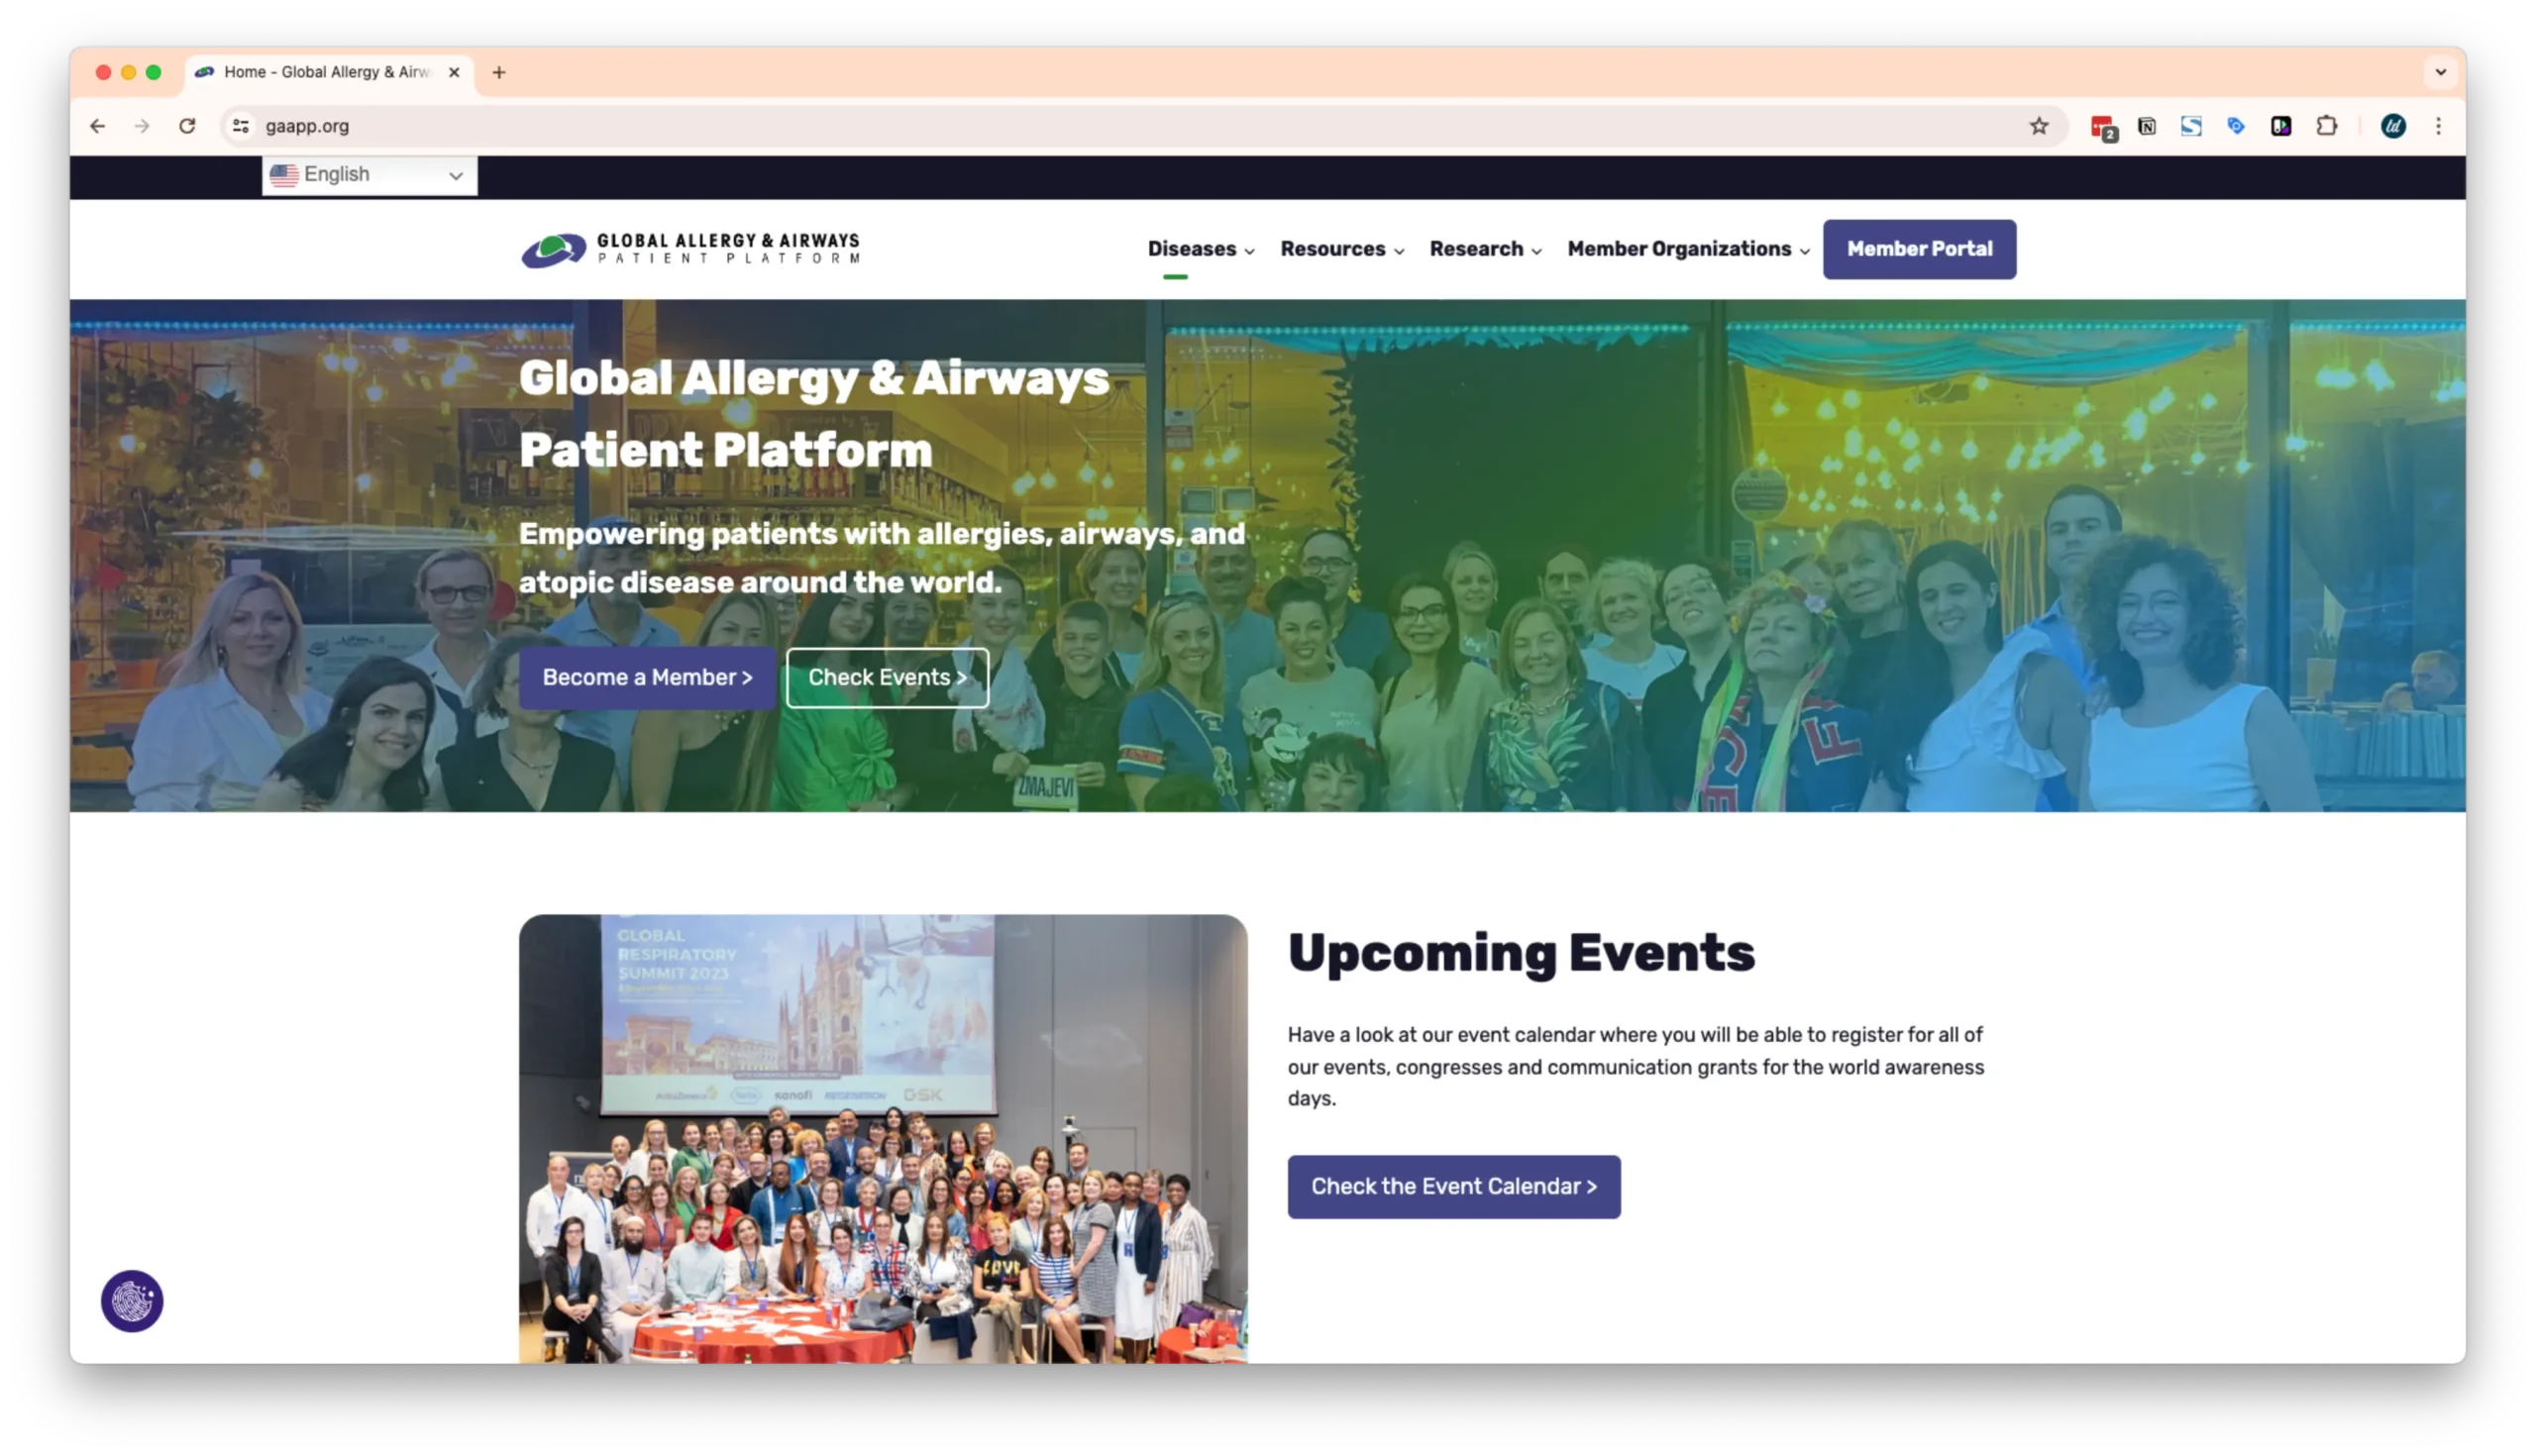 A homepage for the Global Allergy & Airways Patient Platform featuring a banner with a group of people, promoting membership and events. Below is an upcoming events section with a large group photo from a summit.